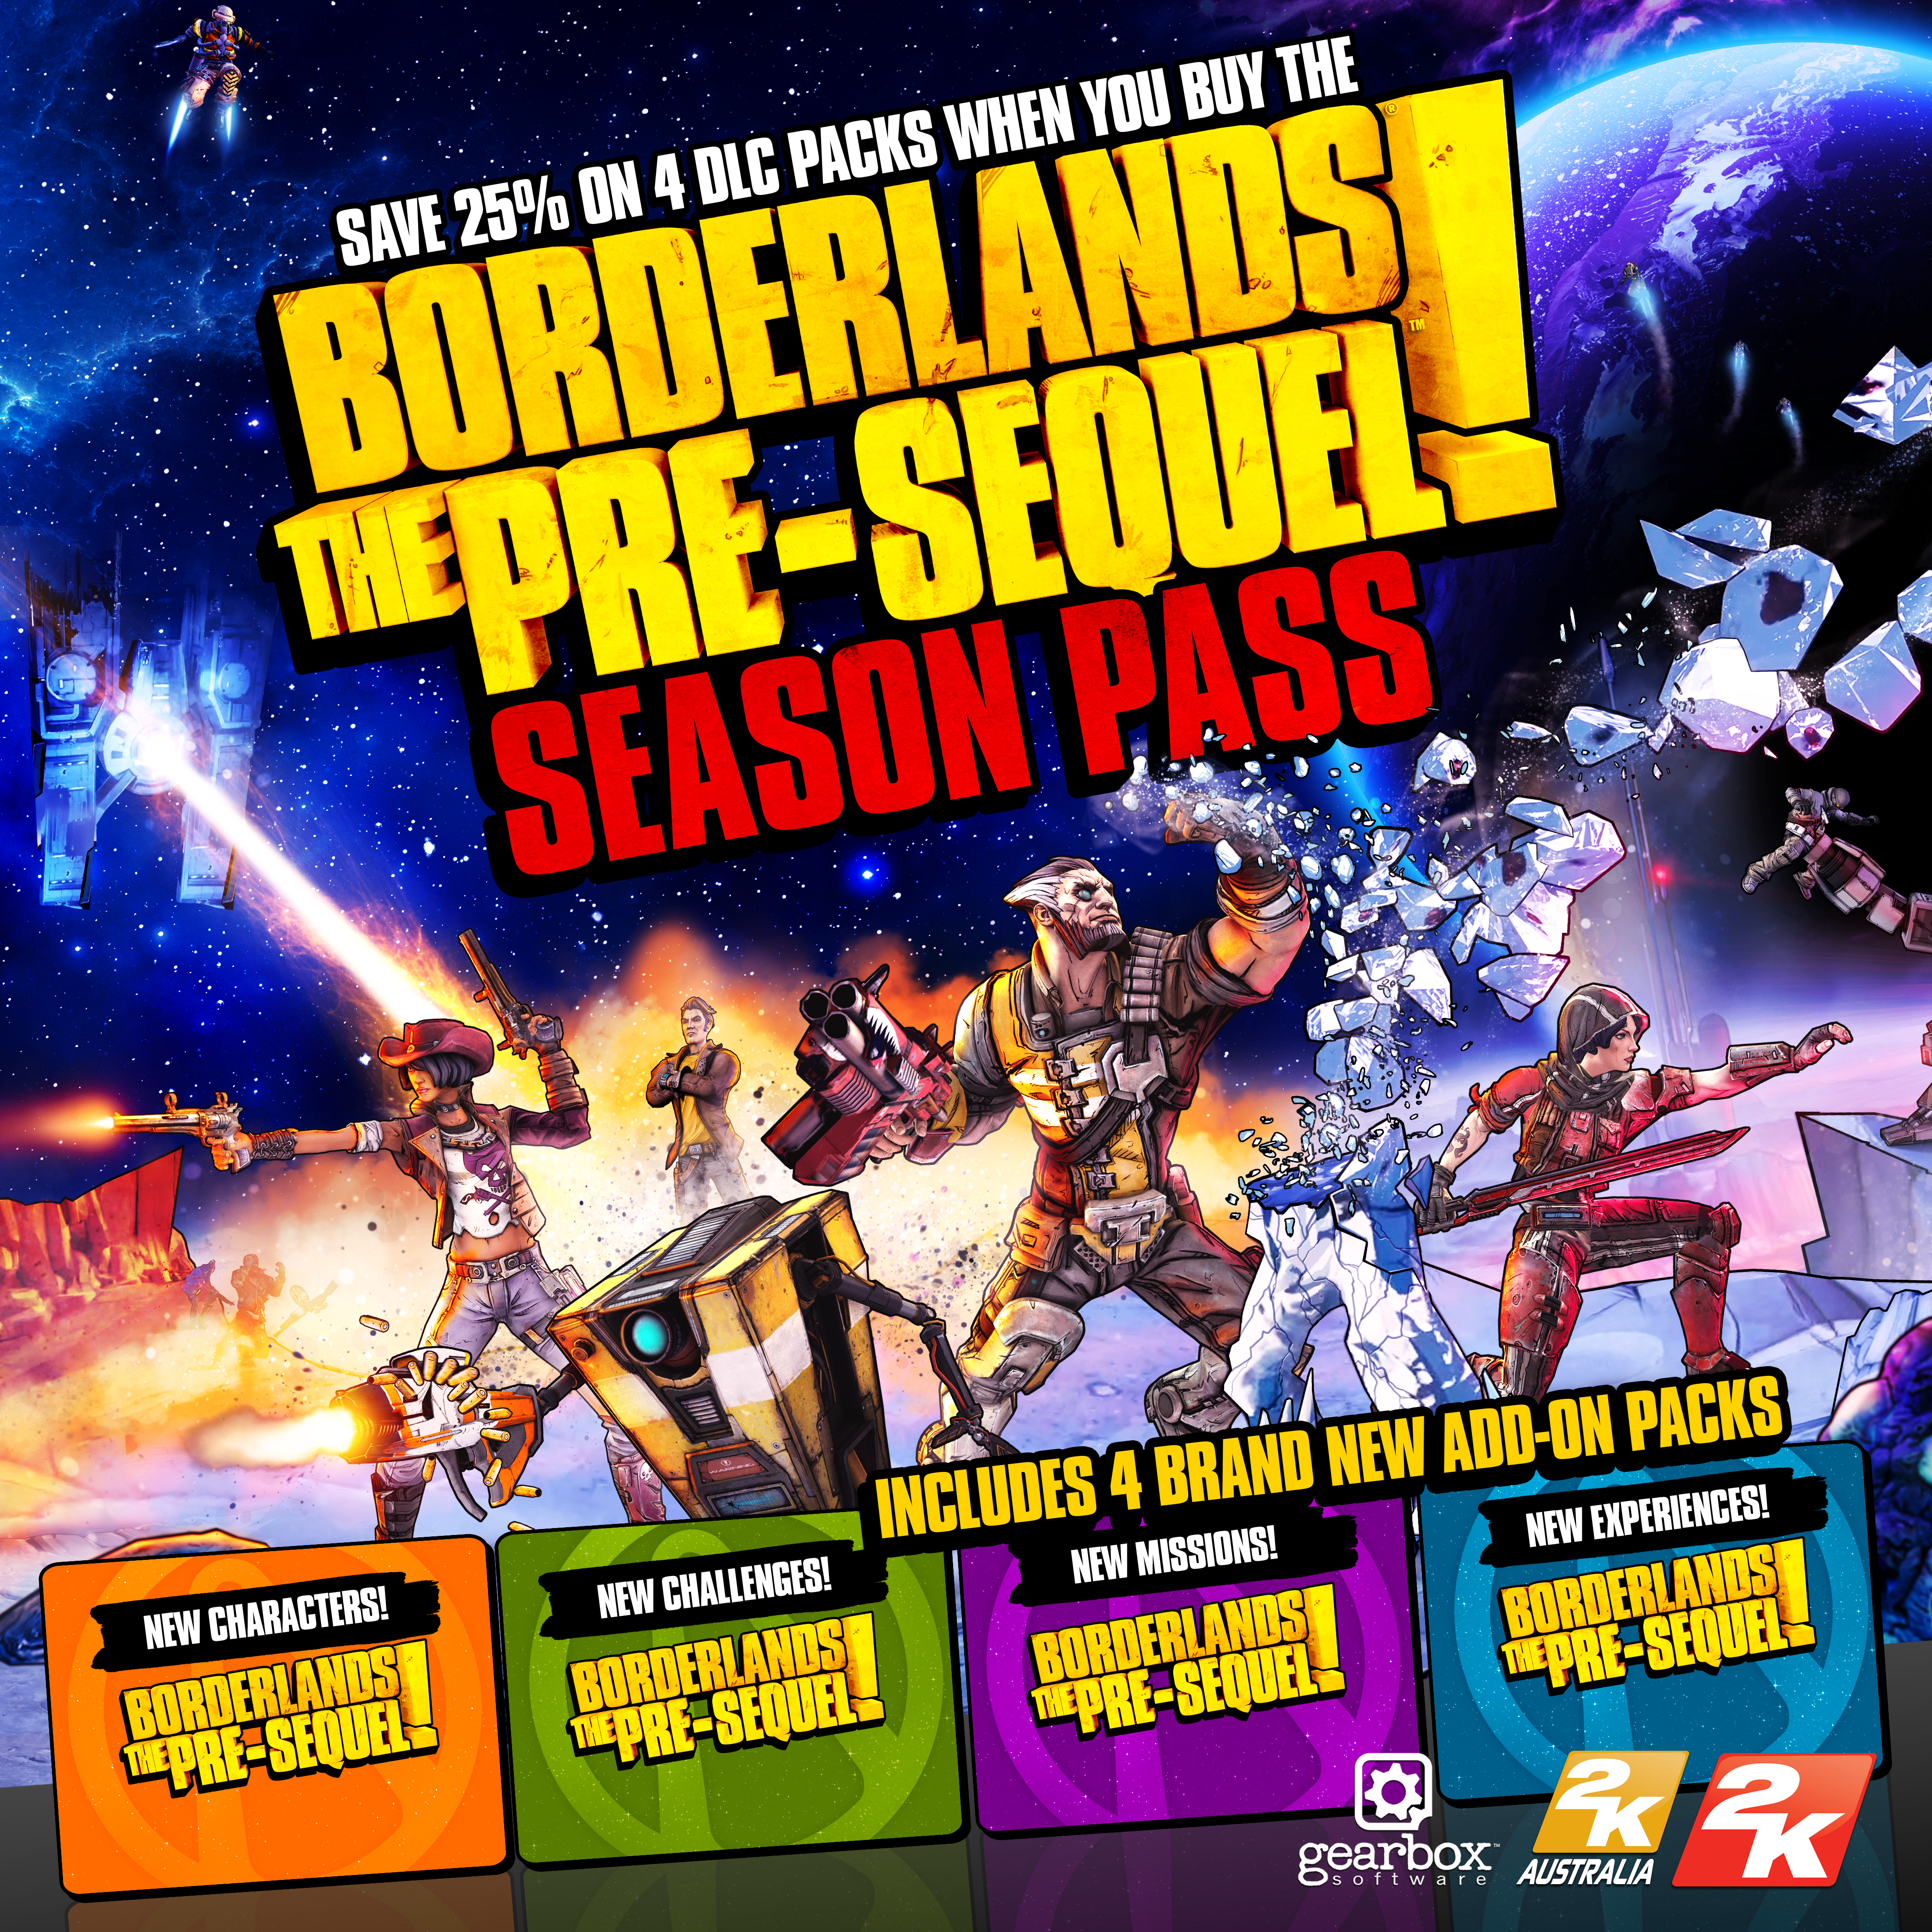 2k Announces Borderlands The Pre Sequel Season Pass For Upcoming Add On Content Business Wire